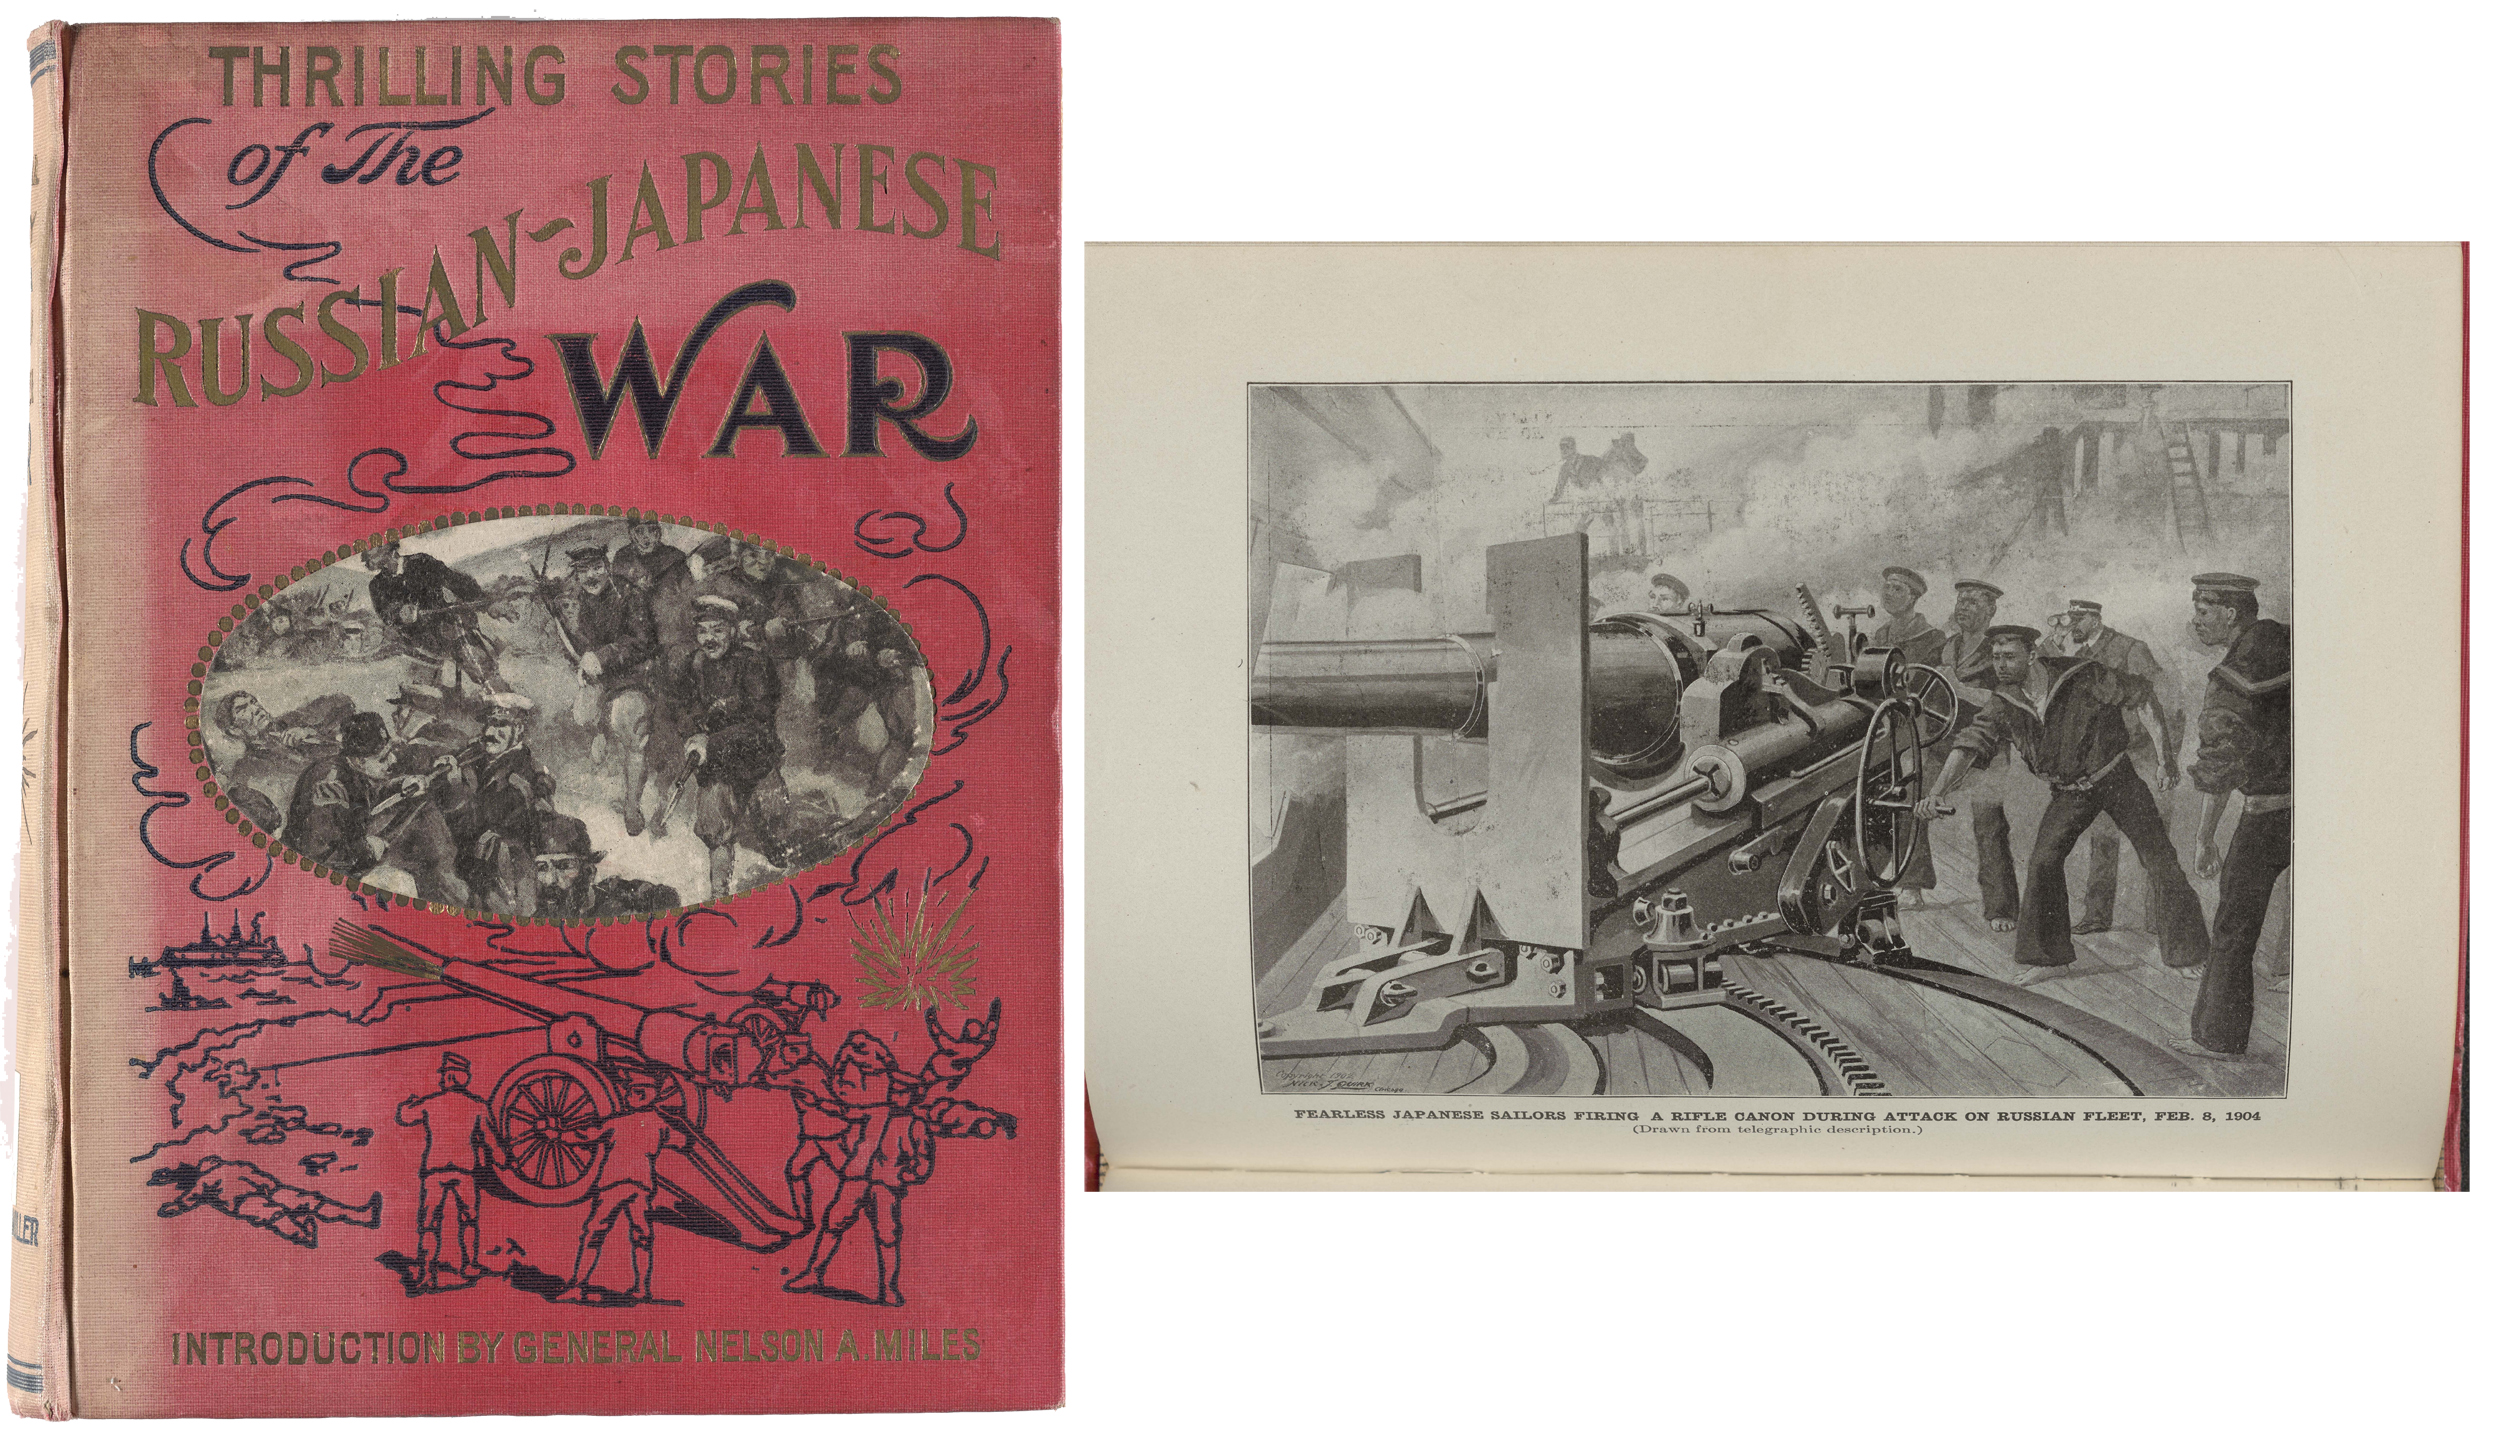 Thrilling Stories of the Russian-Japanese War